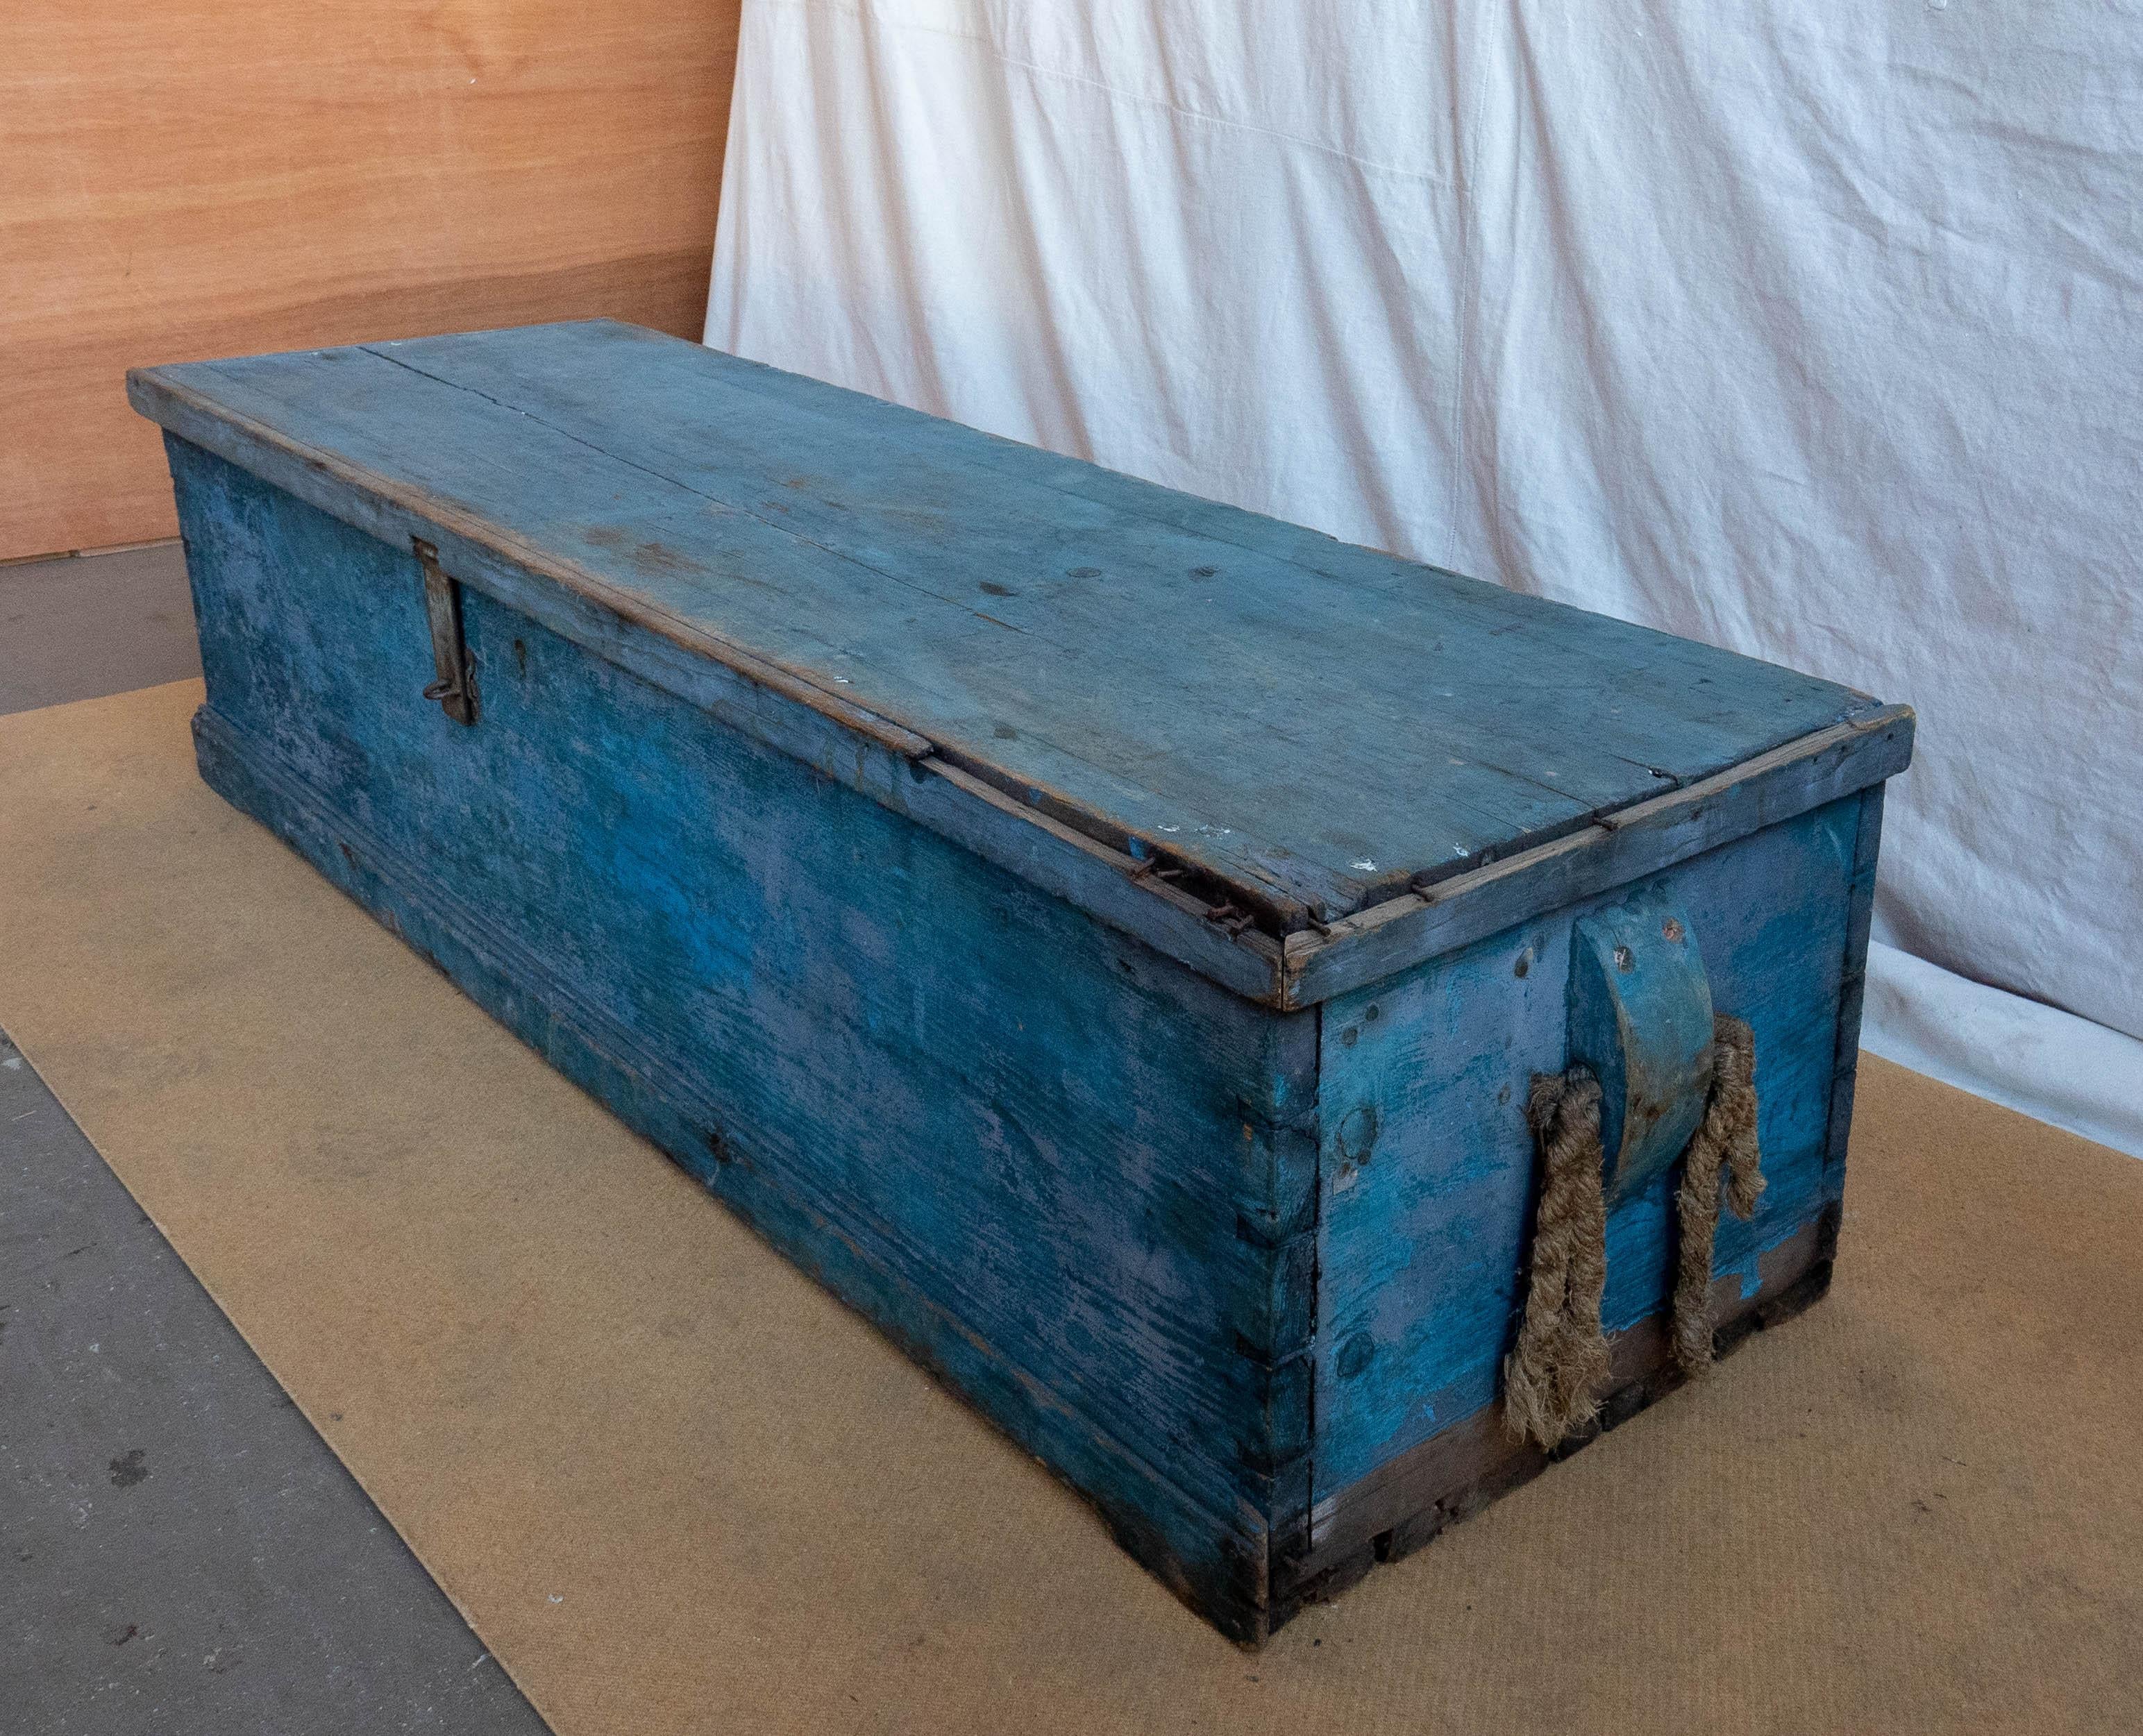 19th century long sea chest in sky blue paint, the rectangular top having applied lip, above dove-tailed case with carved wooden beckets holding the frayed remains of the original spliced rope handles, in very old sky blue paint. Unusual sized sea